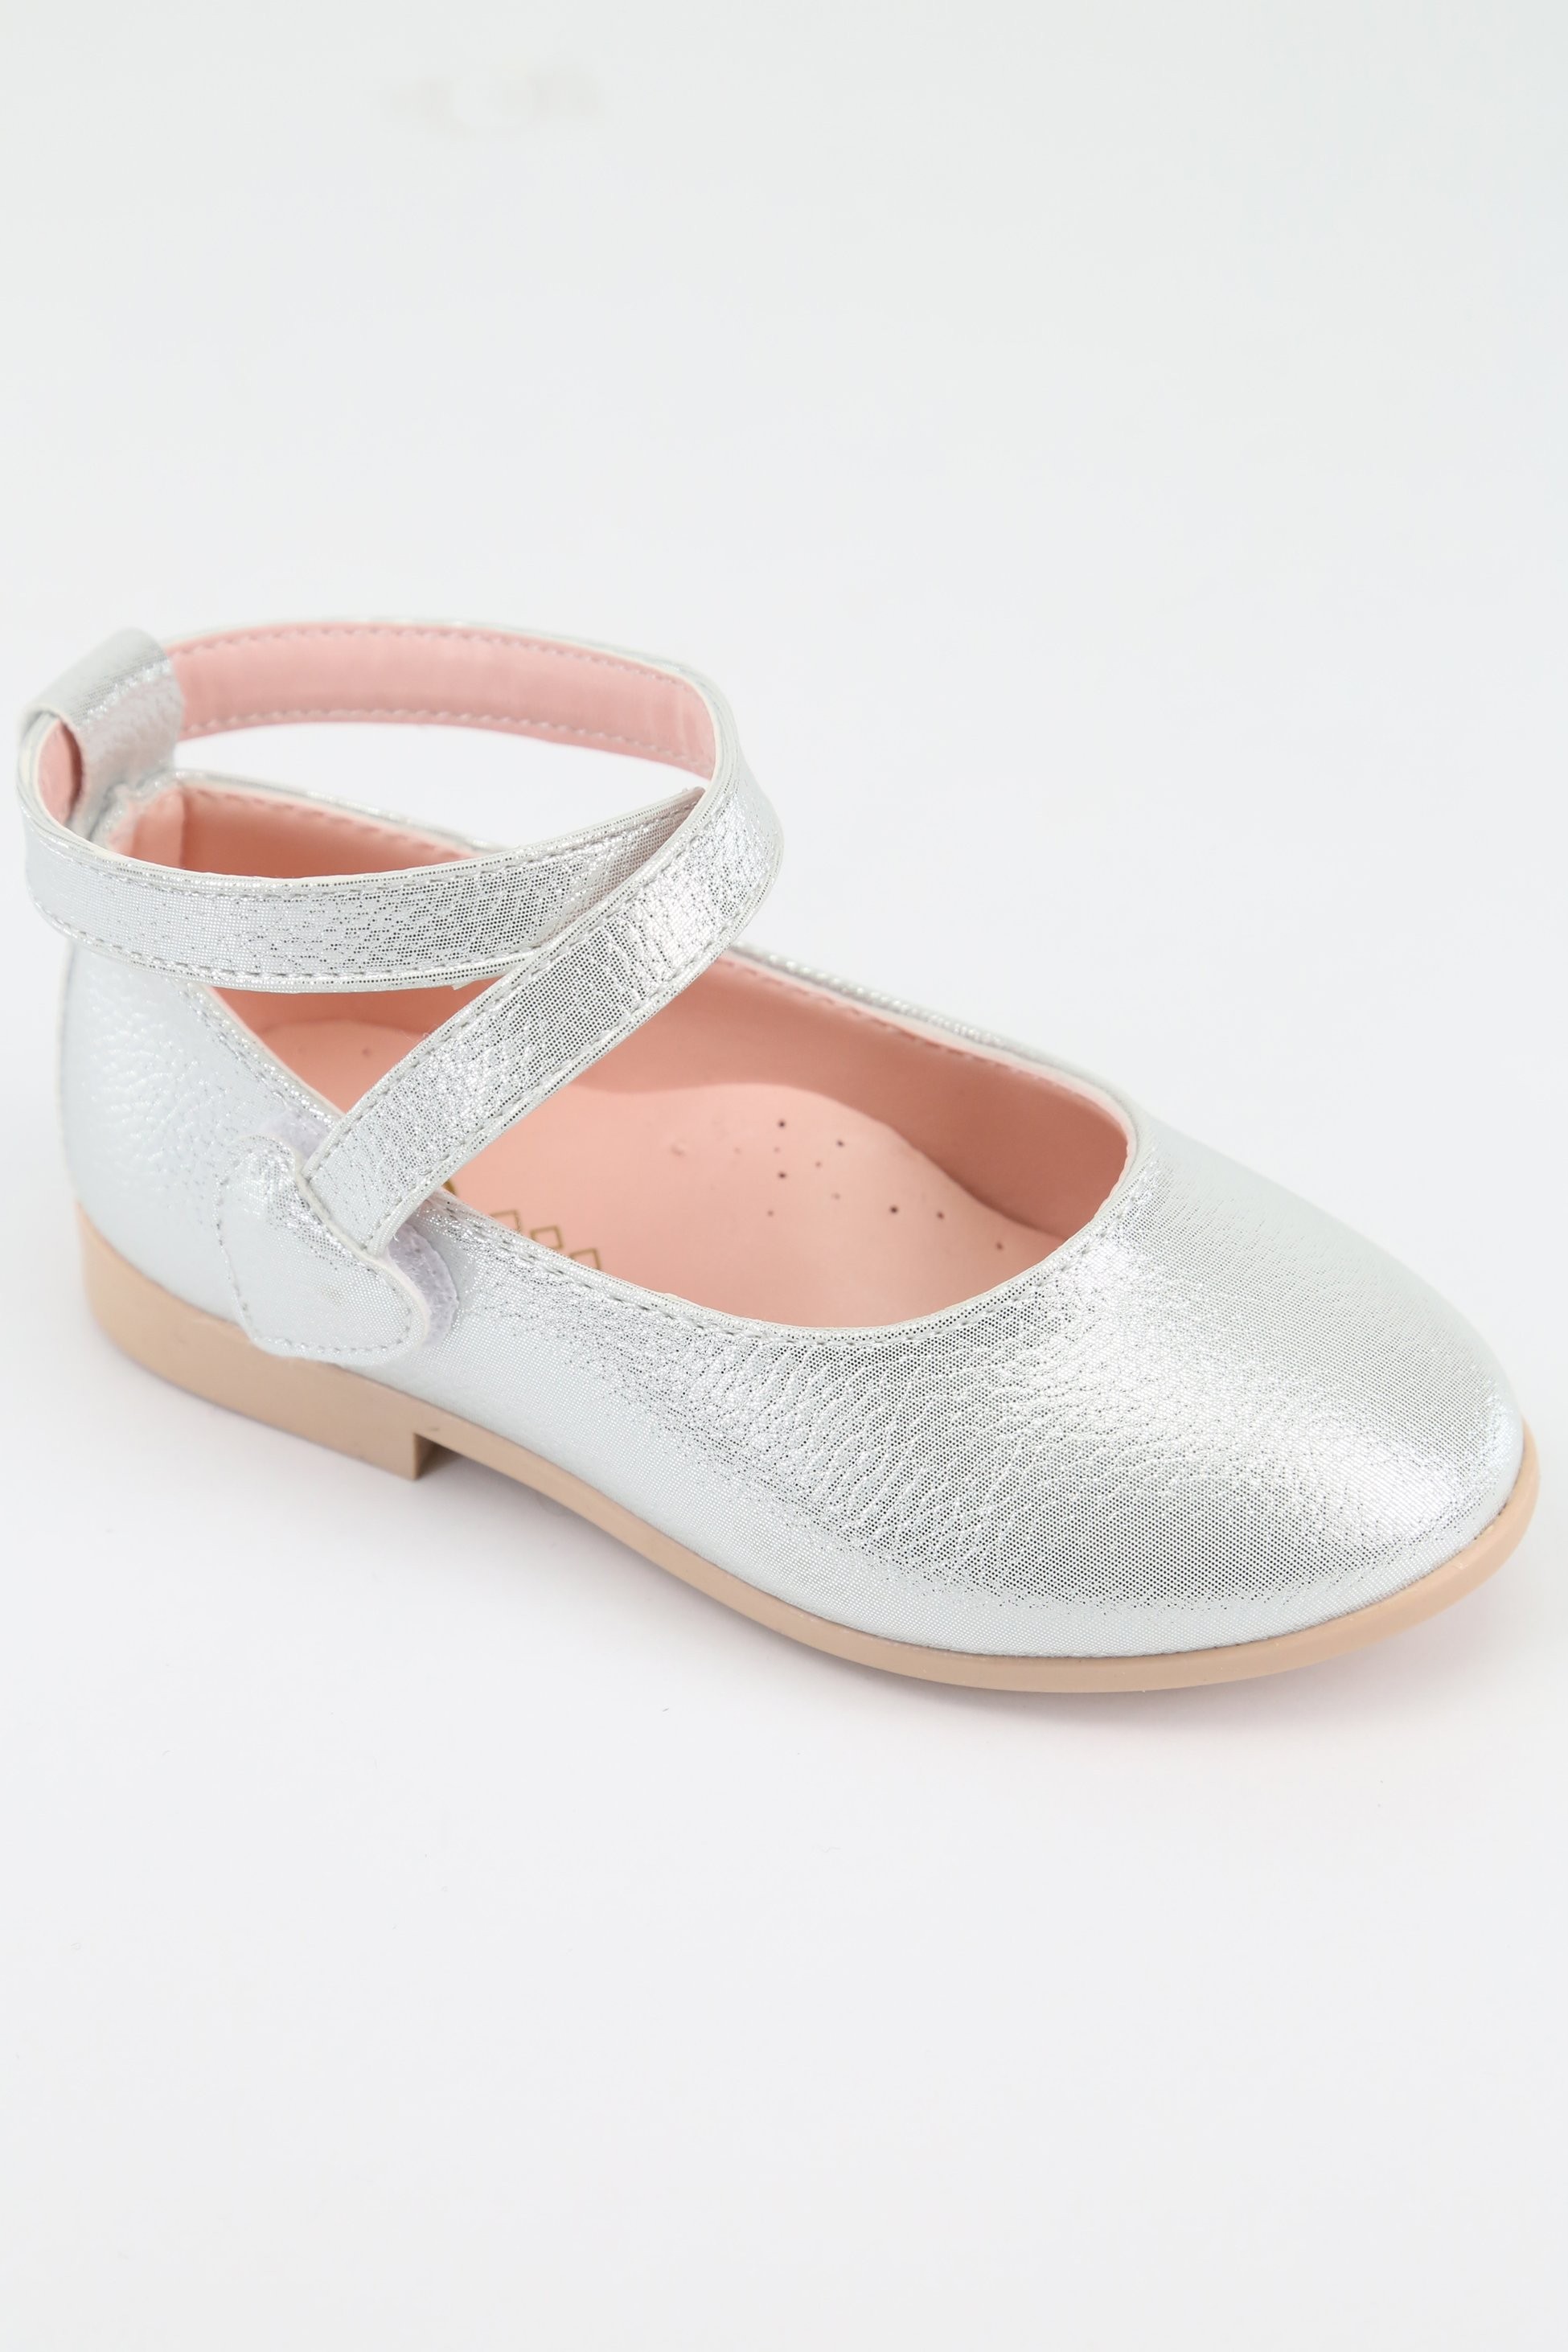 Girls' Shiny Mary Jane Flat Shoes with Criss Cross Strap